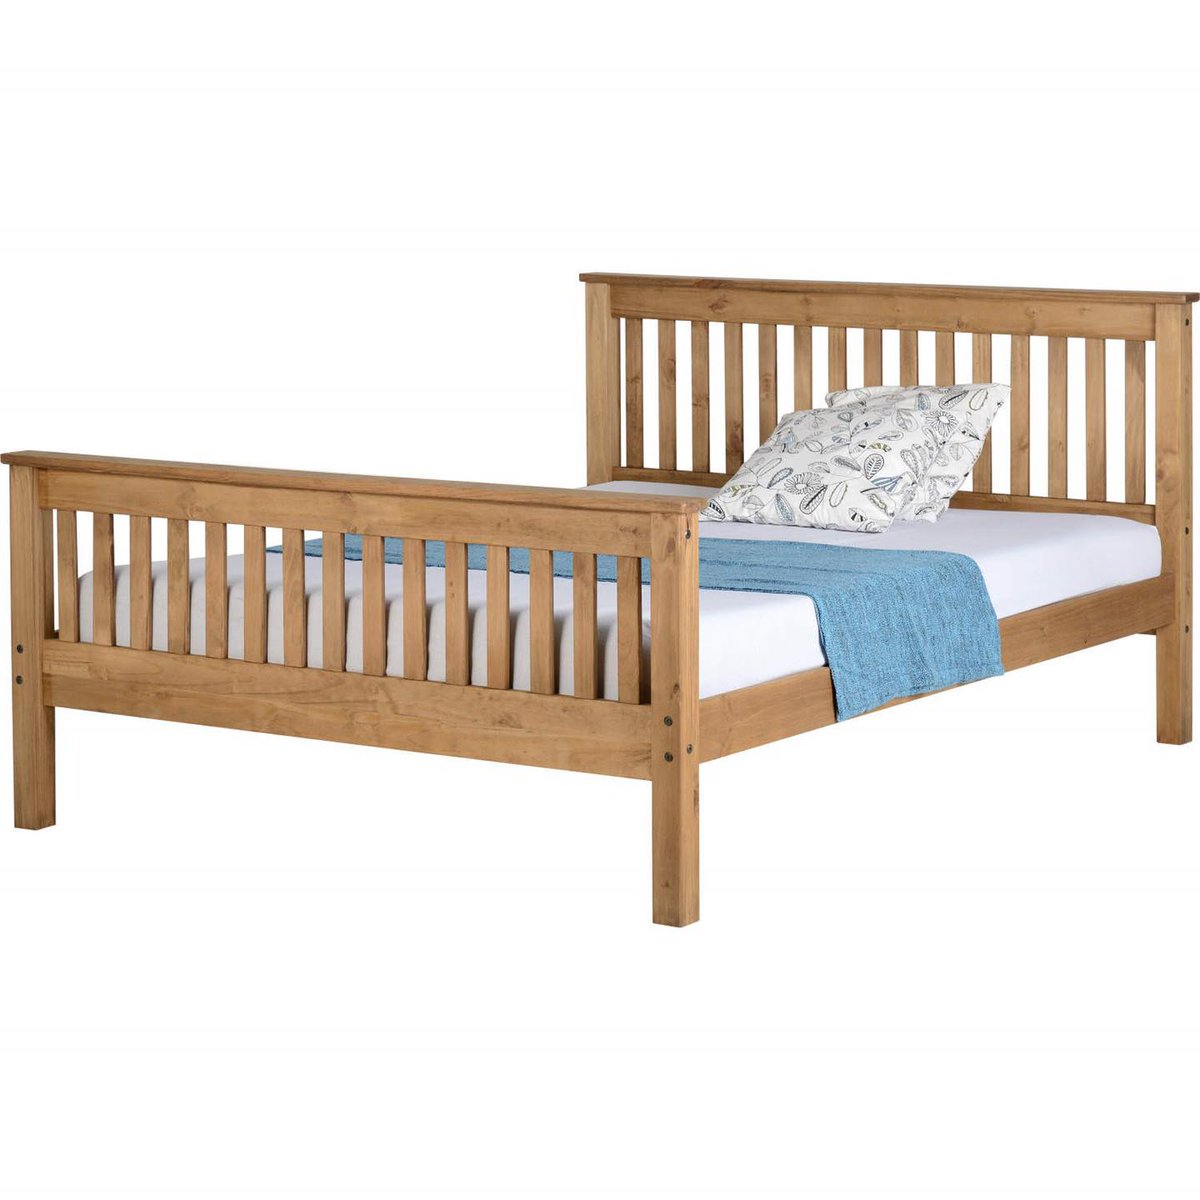 5ft nice bedstead 😀
Now only £210😀
Free layaway or have it today😀
#bedroomfurniture #bedroom #bedroomdecor #furniture #homedecor #bedroomdesign #interiordesign #bedroomideas #bed #bedroominspo #bedroomstyling #bedroominterior #homefurniture #bedroomgoals #bedroominspiration